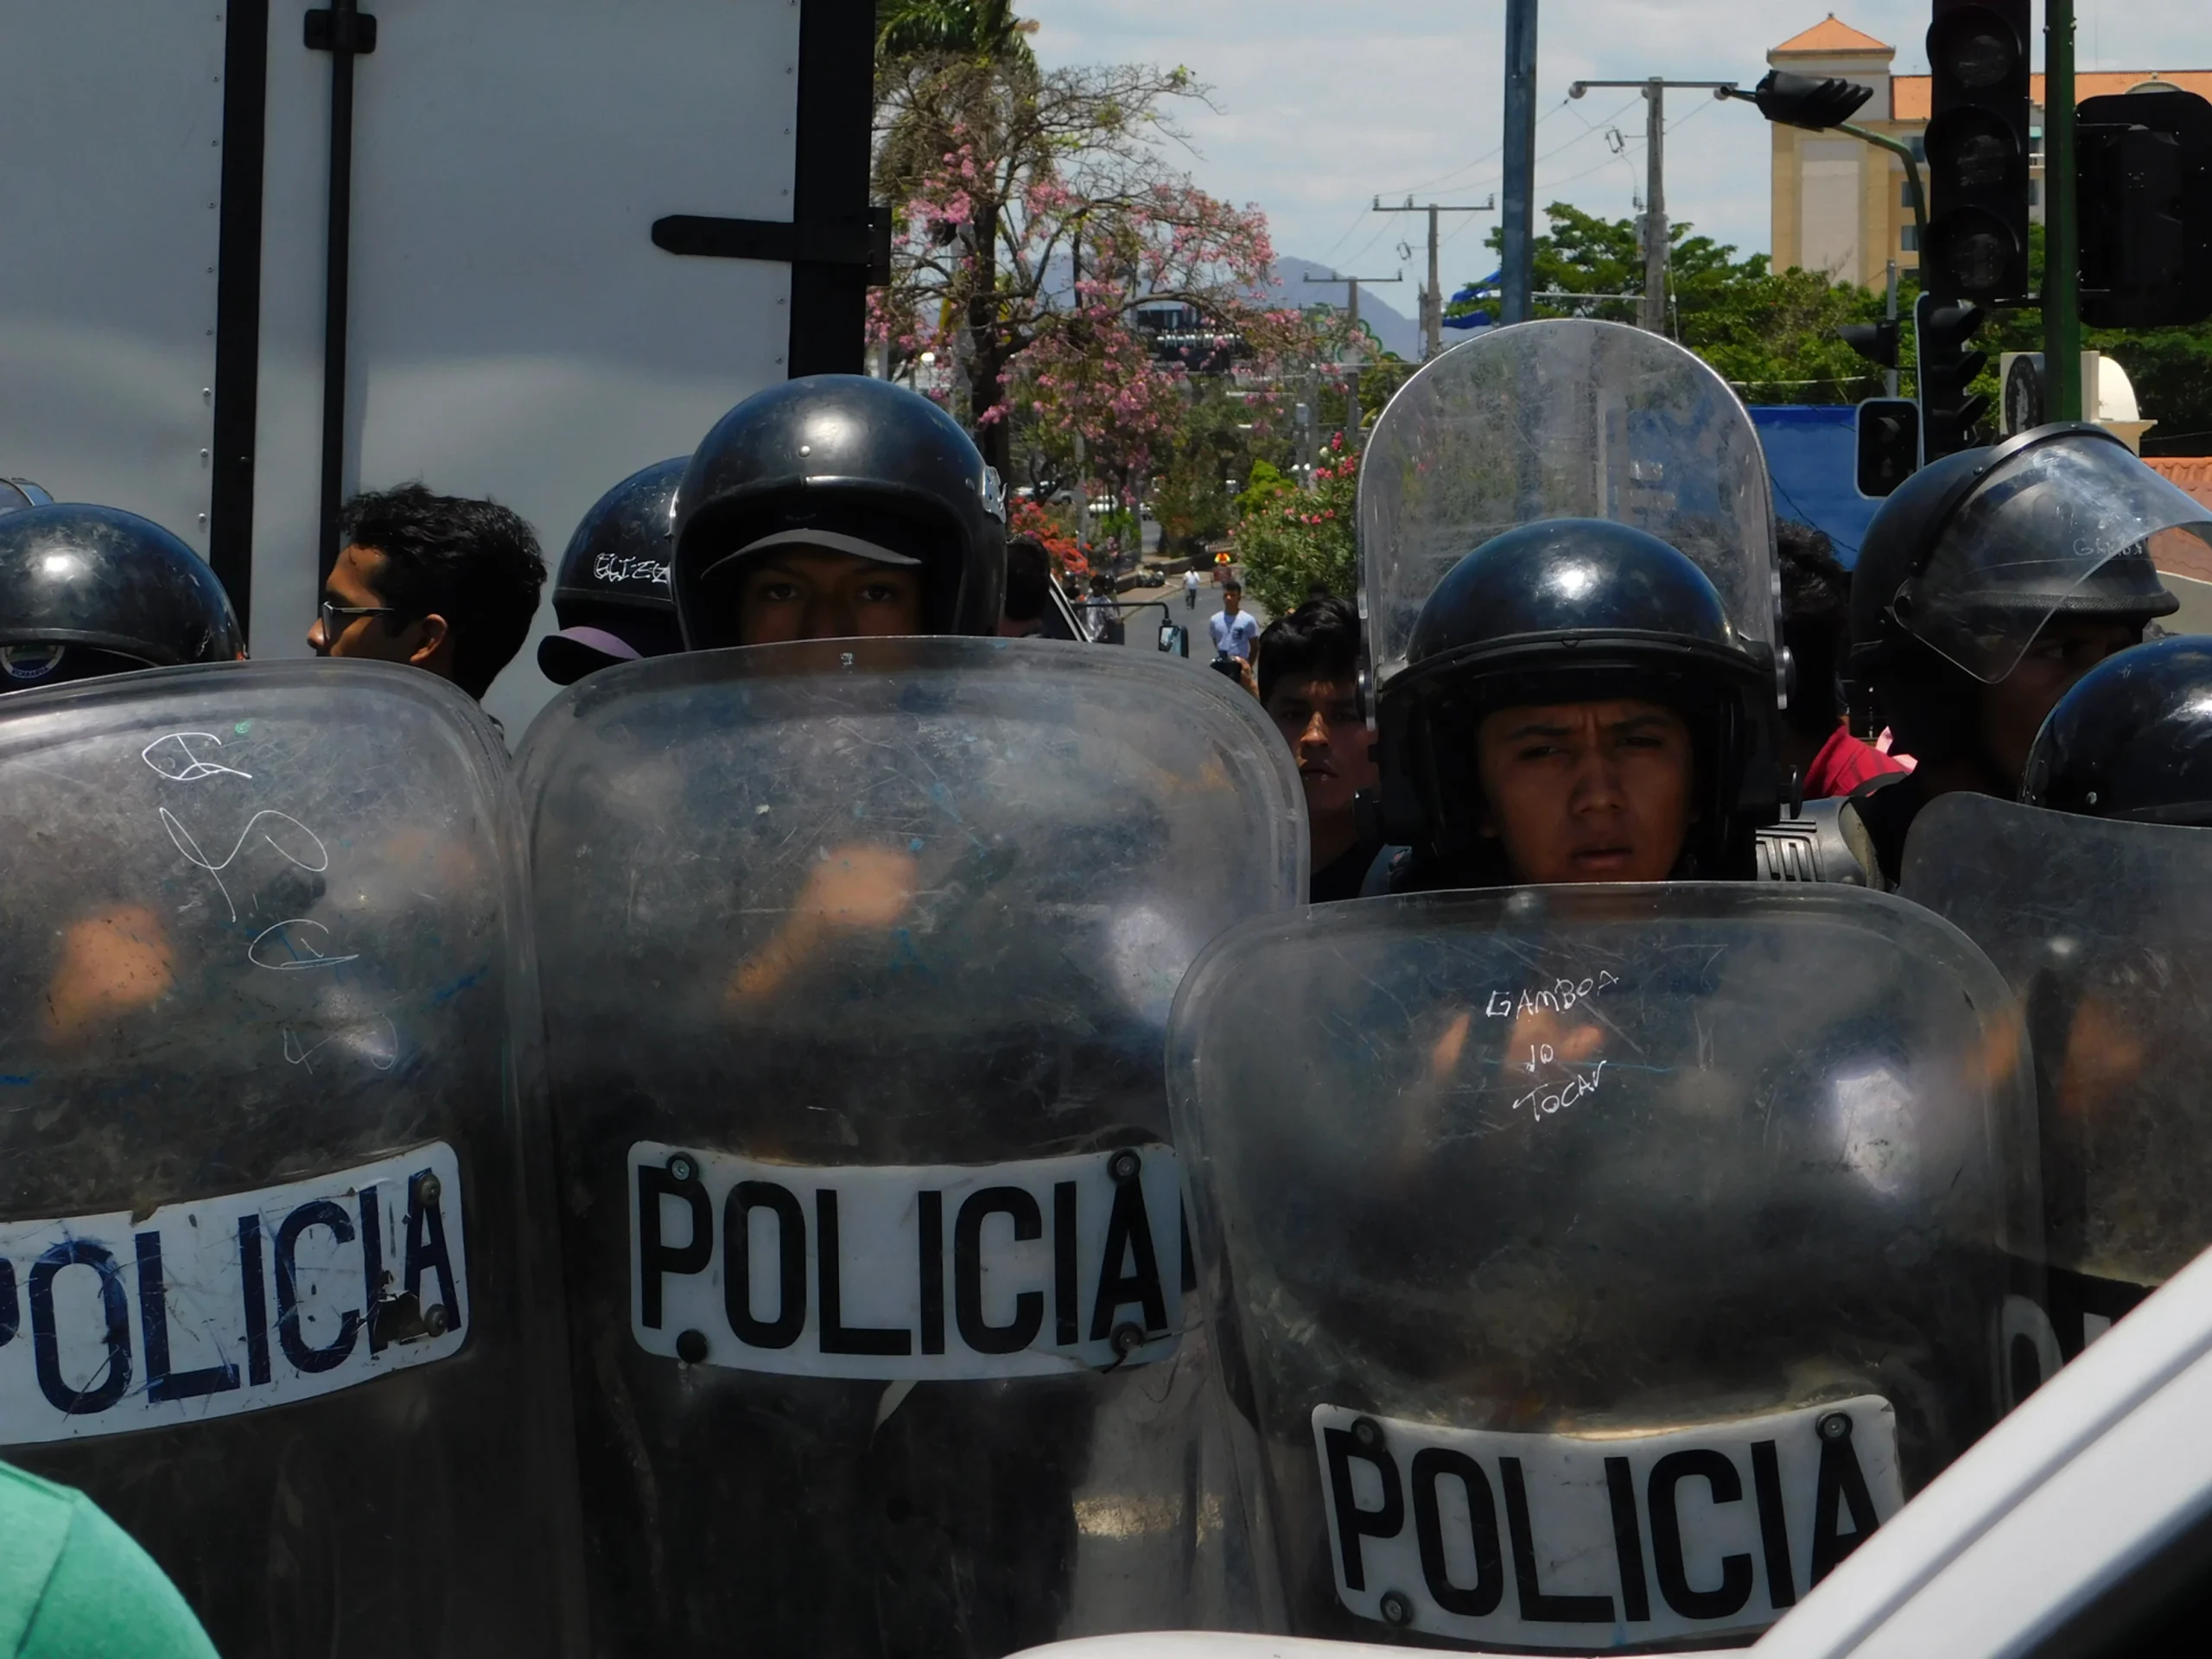 Members of the Nicaraguan Police, "trapped" by the same regime they serve